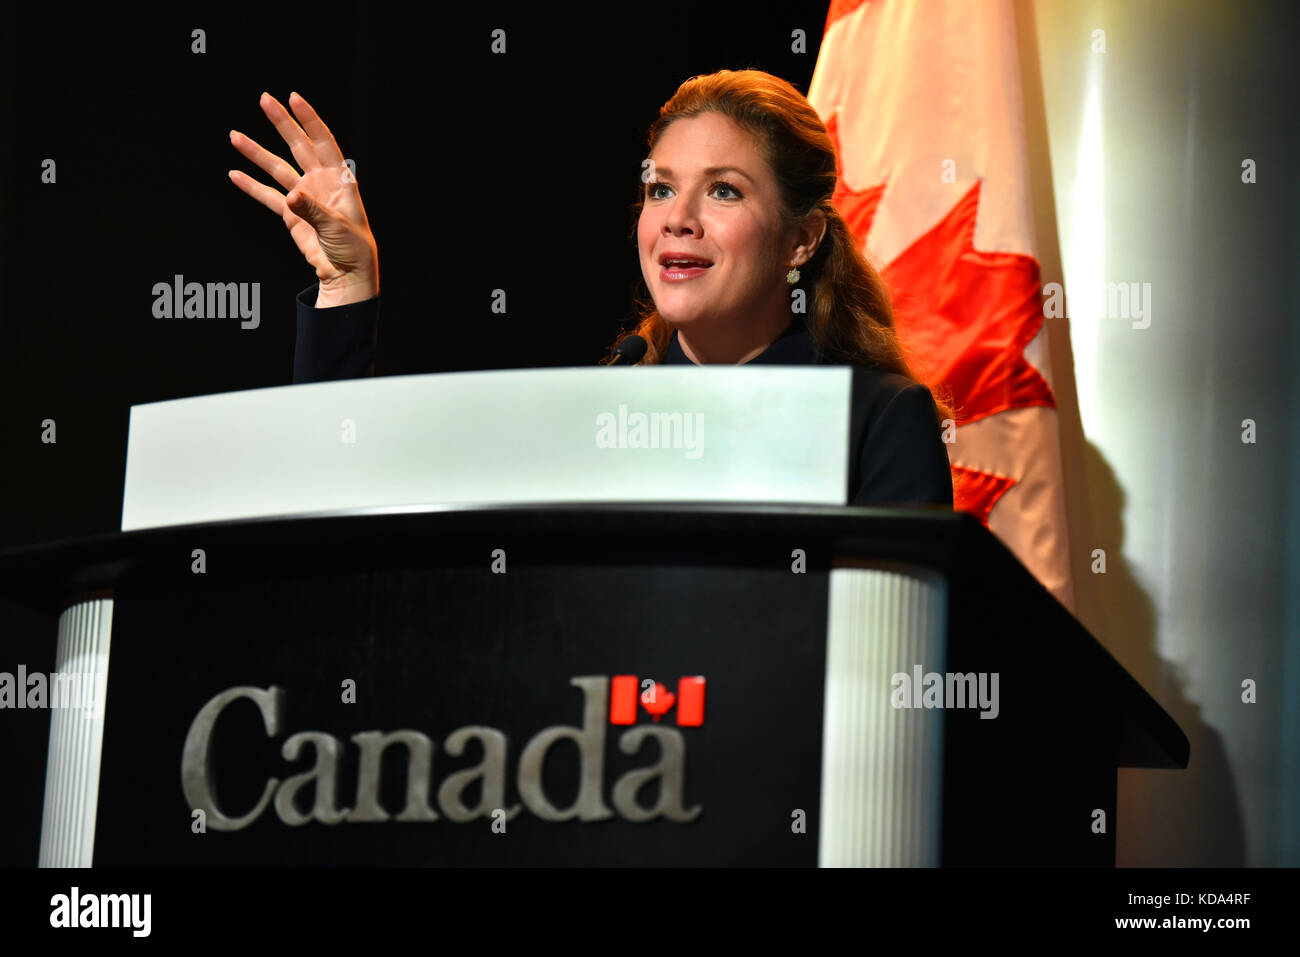 Madam Sophie Gregoire Trudeau, the wife of Canadian Prime Minister Justin Trudeau, addresses the Together for Girls organization on October 11th, the International Day of the Girl at the Canadian Embassy in Washington DC. She discusses breaking the cycle of violence against girls. Ms. Trudeau is an advocate for gender equality and women's and girls' rights and freedoms. Together for Girls is a global public-private partnership dedicated to ending violence against children. Photo by Sharon Natoli Stock Photo